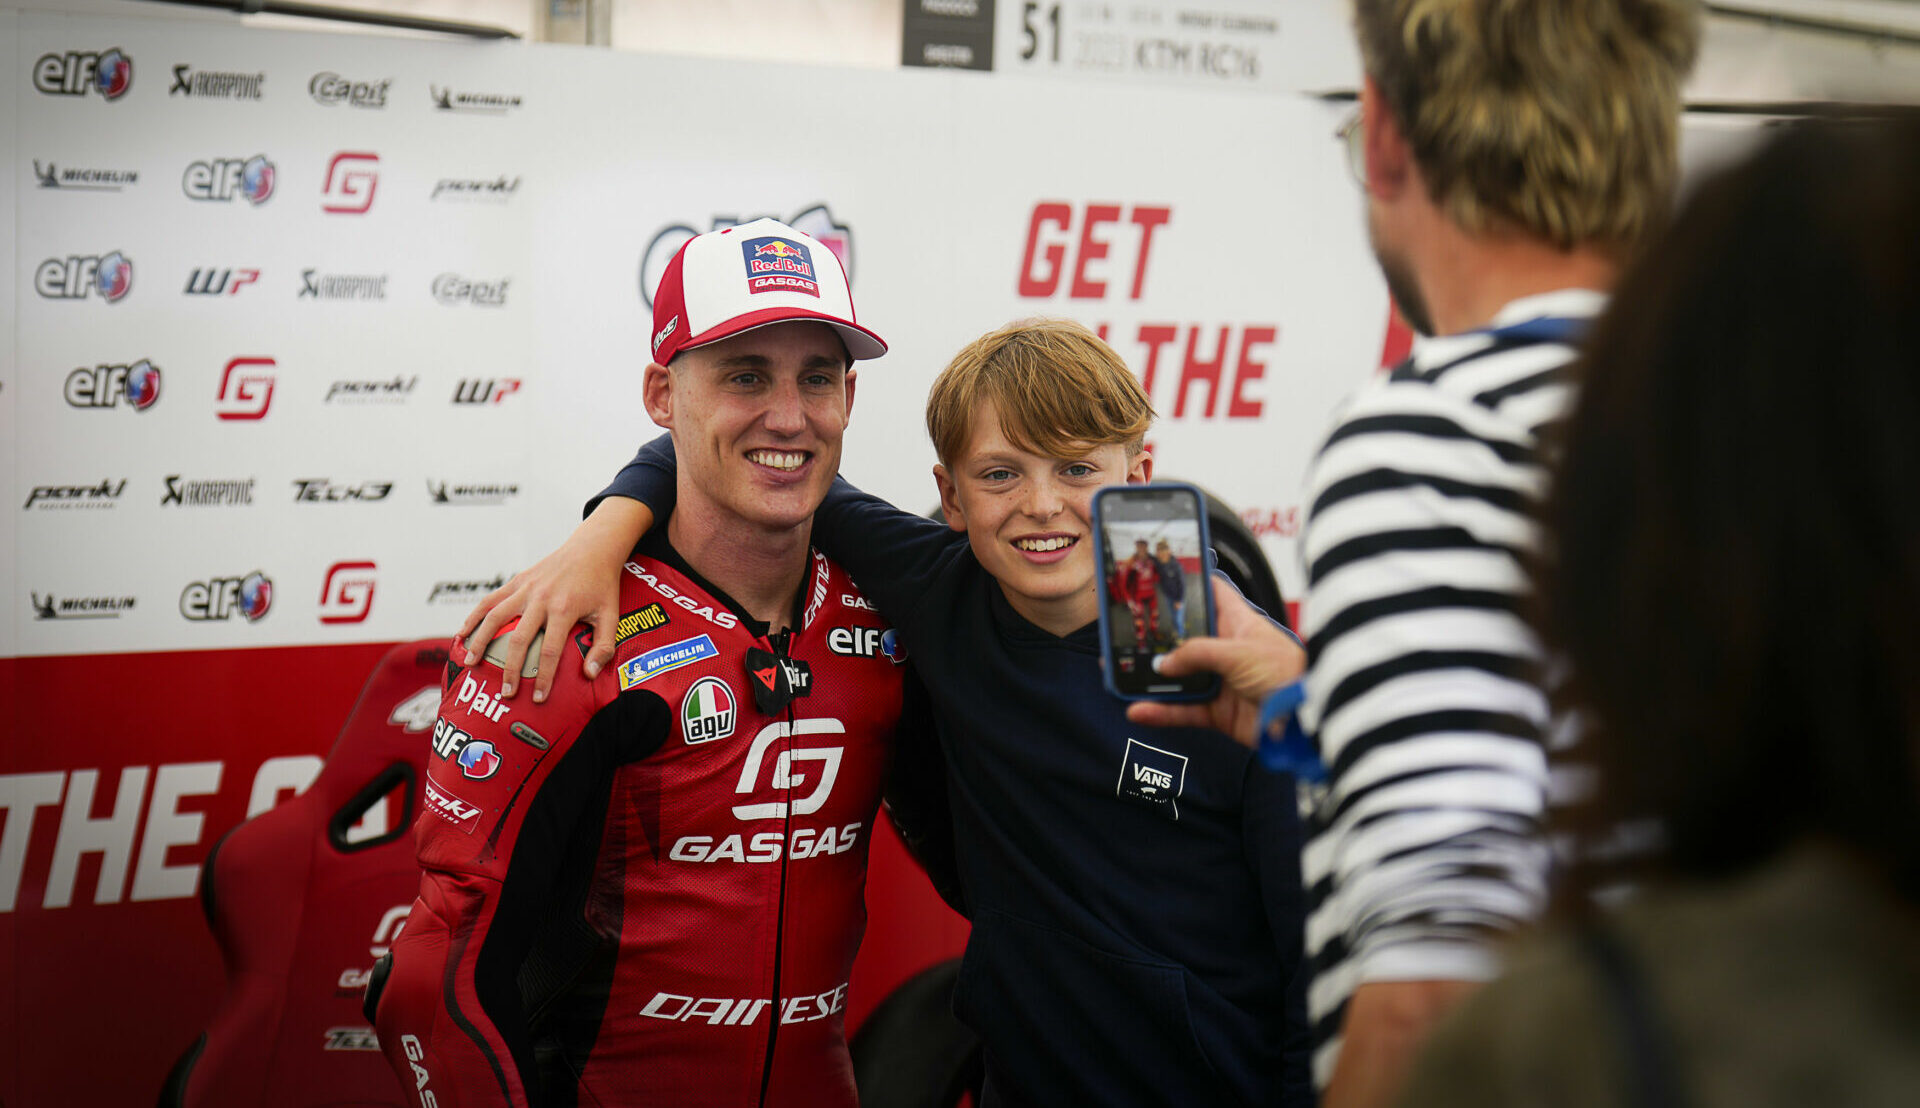 Pol Espargaro, as seen with a young fan at the Goodwood Festival of Speed. Photo courtesy Dorna.